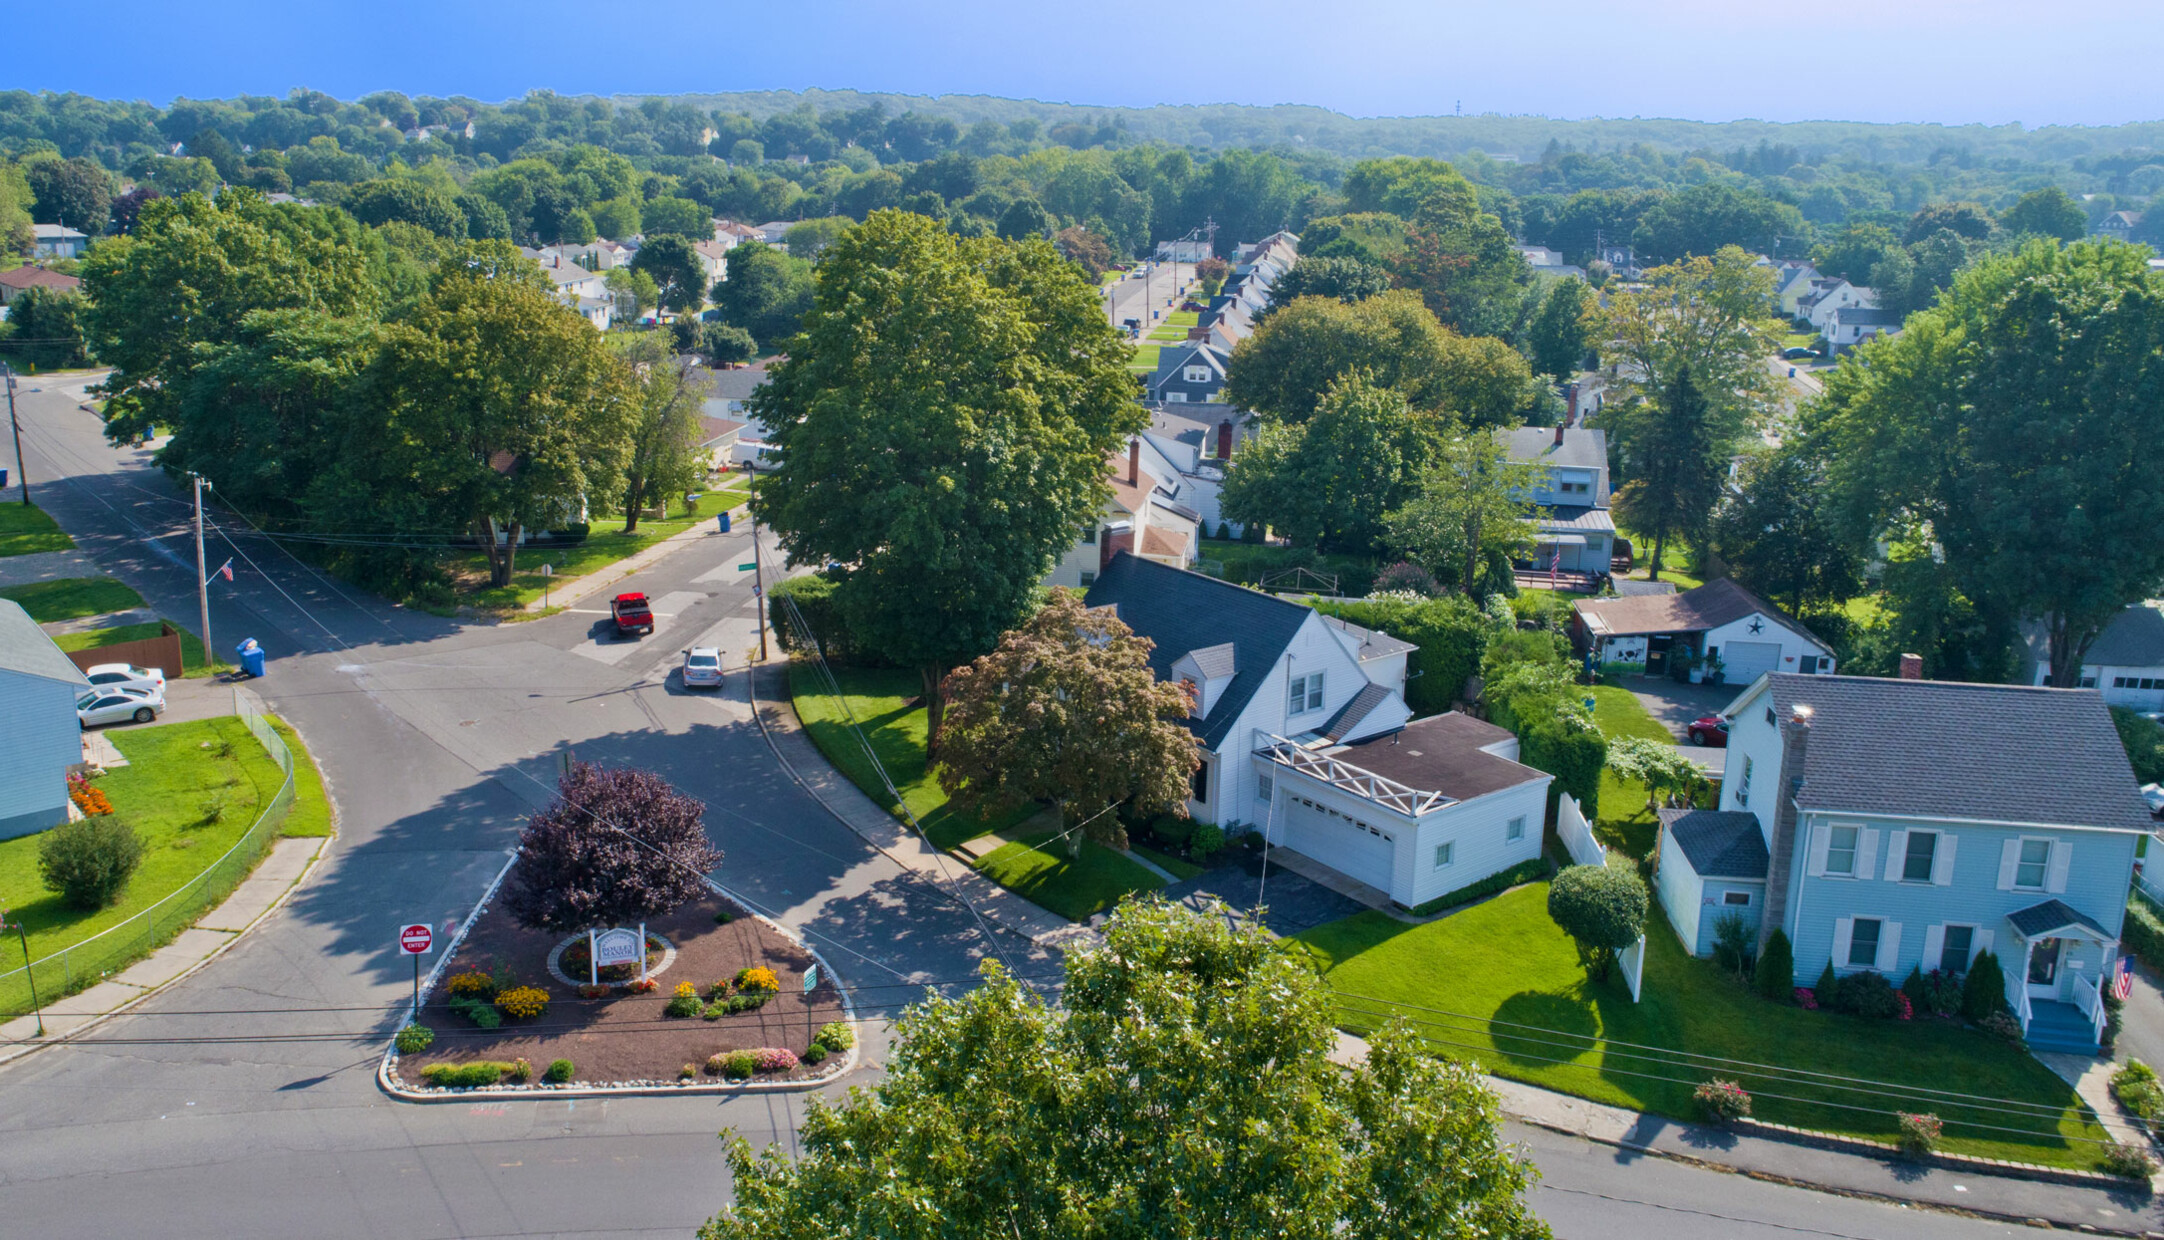 An aerial view of houses and streets in the Bouley Manor neighborhood in Waterbury 